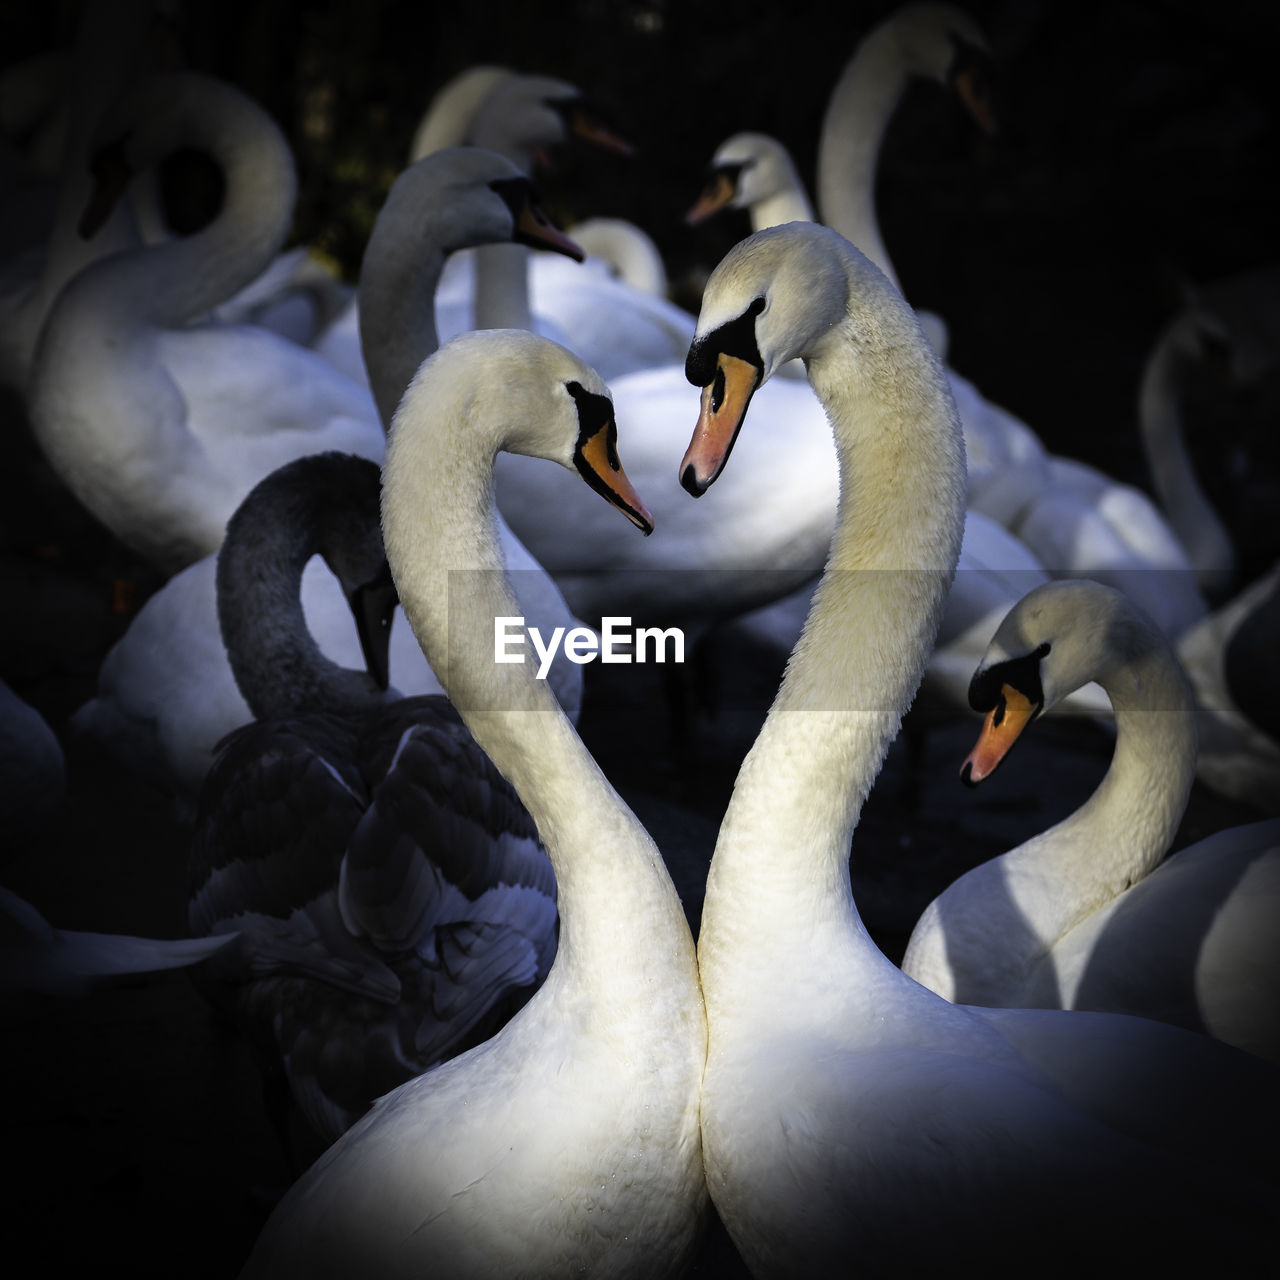 Swans socializing at the swan sanctuary on the banks of the river severn in worcester, uk